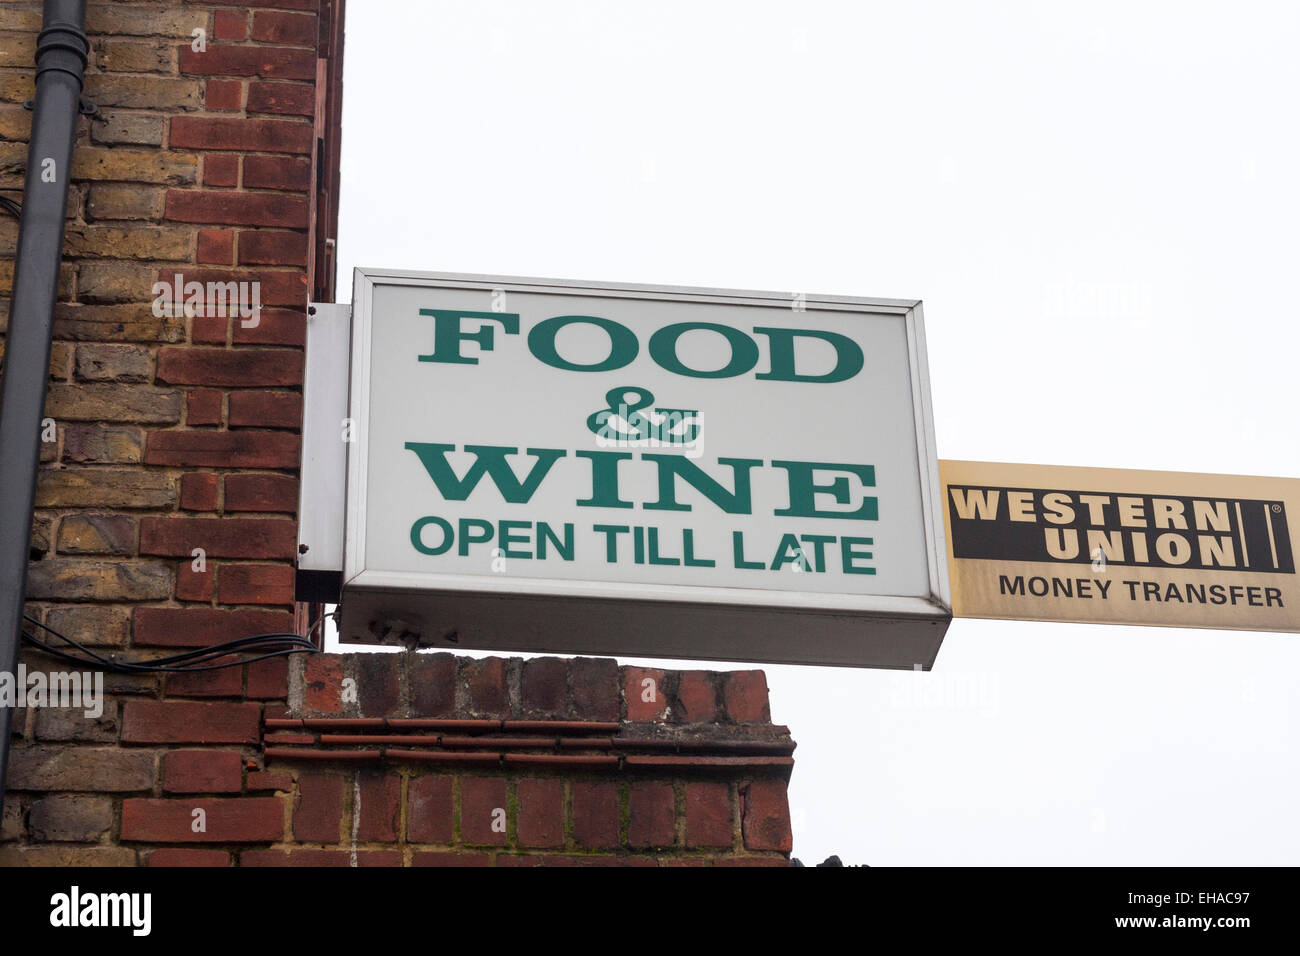 'Food and Wine' and Western Union outside signs Stock Photo